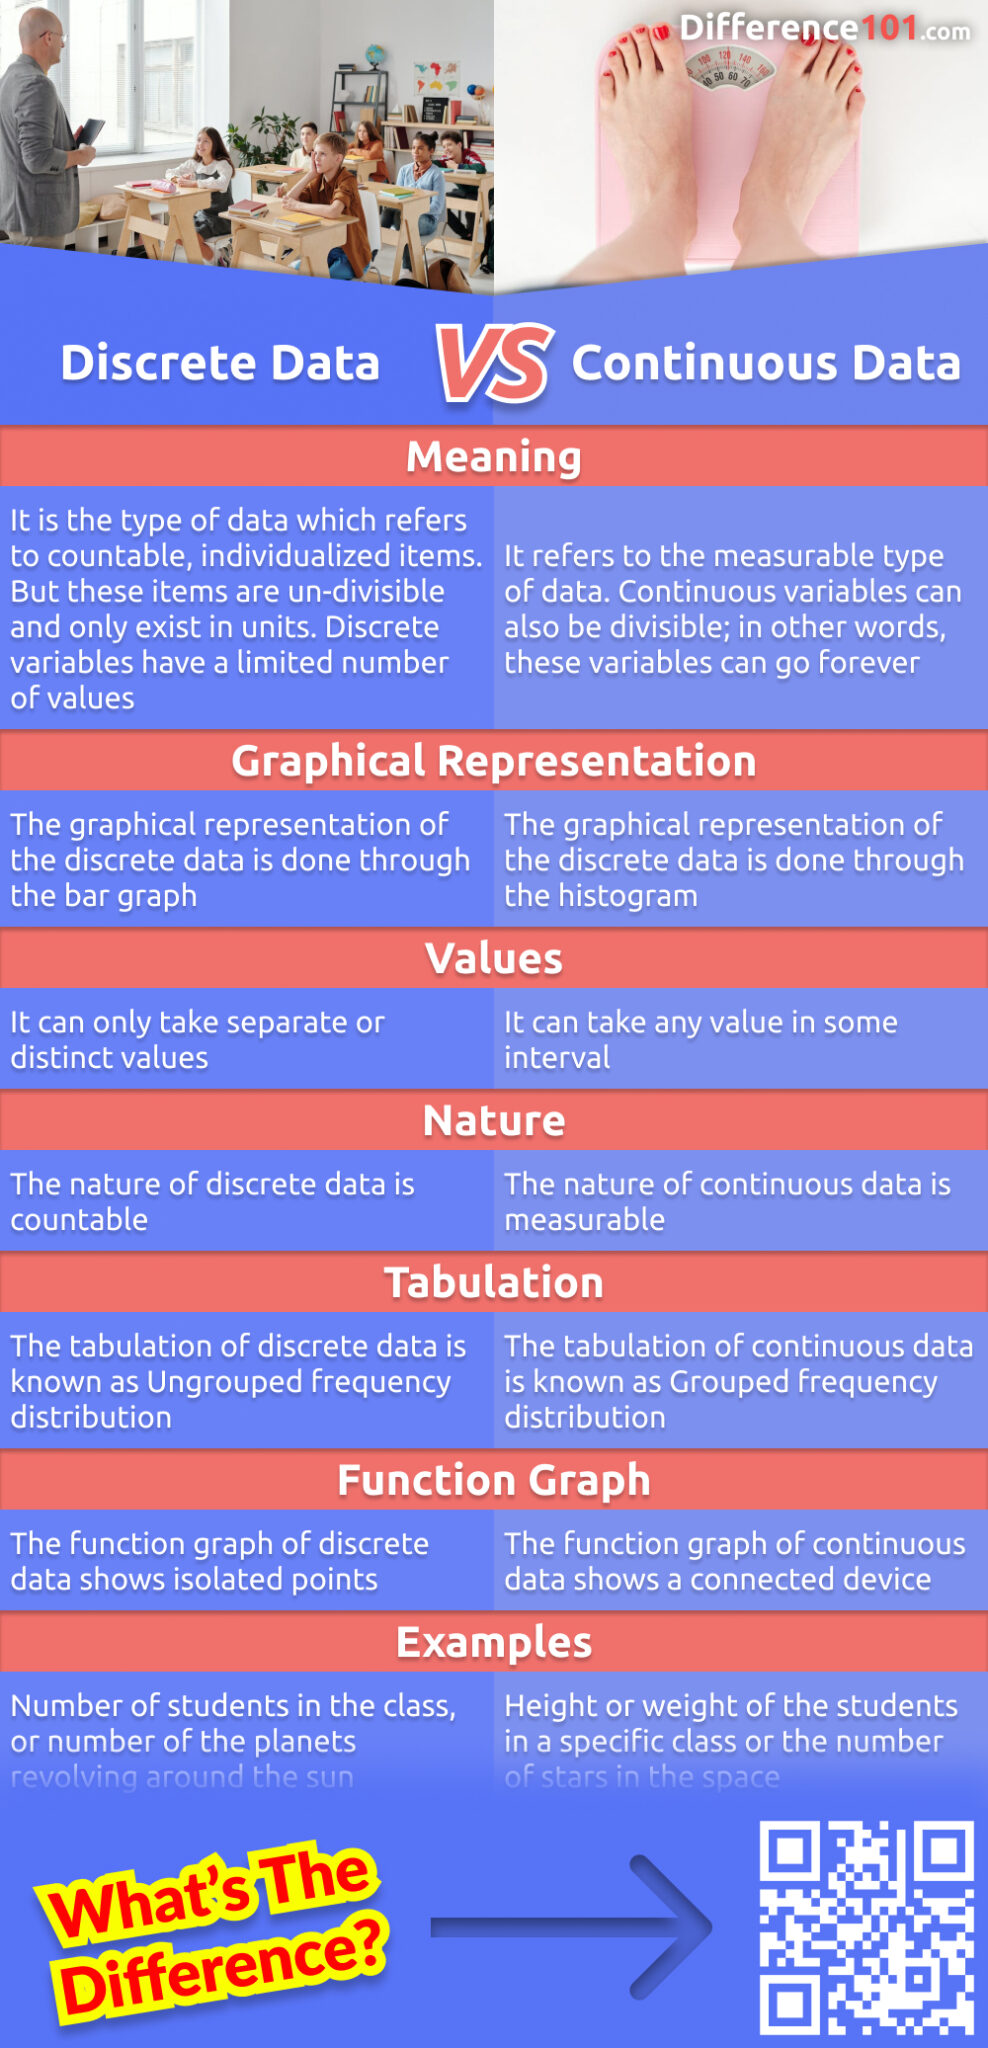 Discrete data and continuous data are two types of data used in statistics and research. Learn about their key differences, the pros and cons of each, and when you should use each type of data.